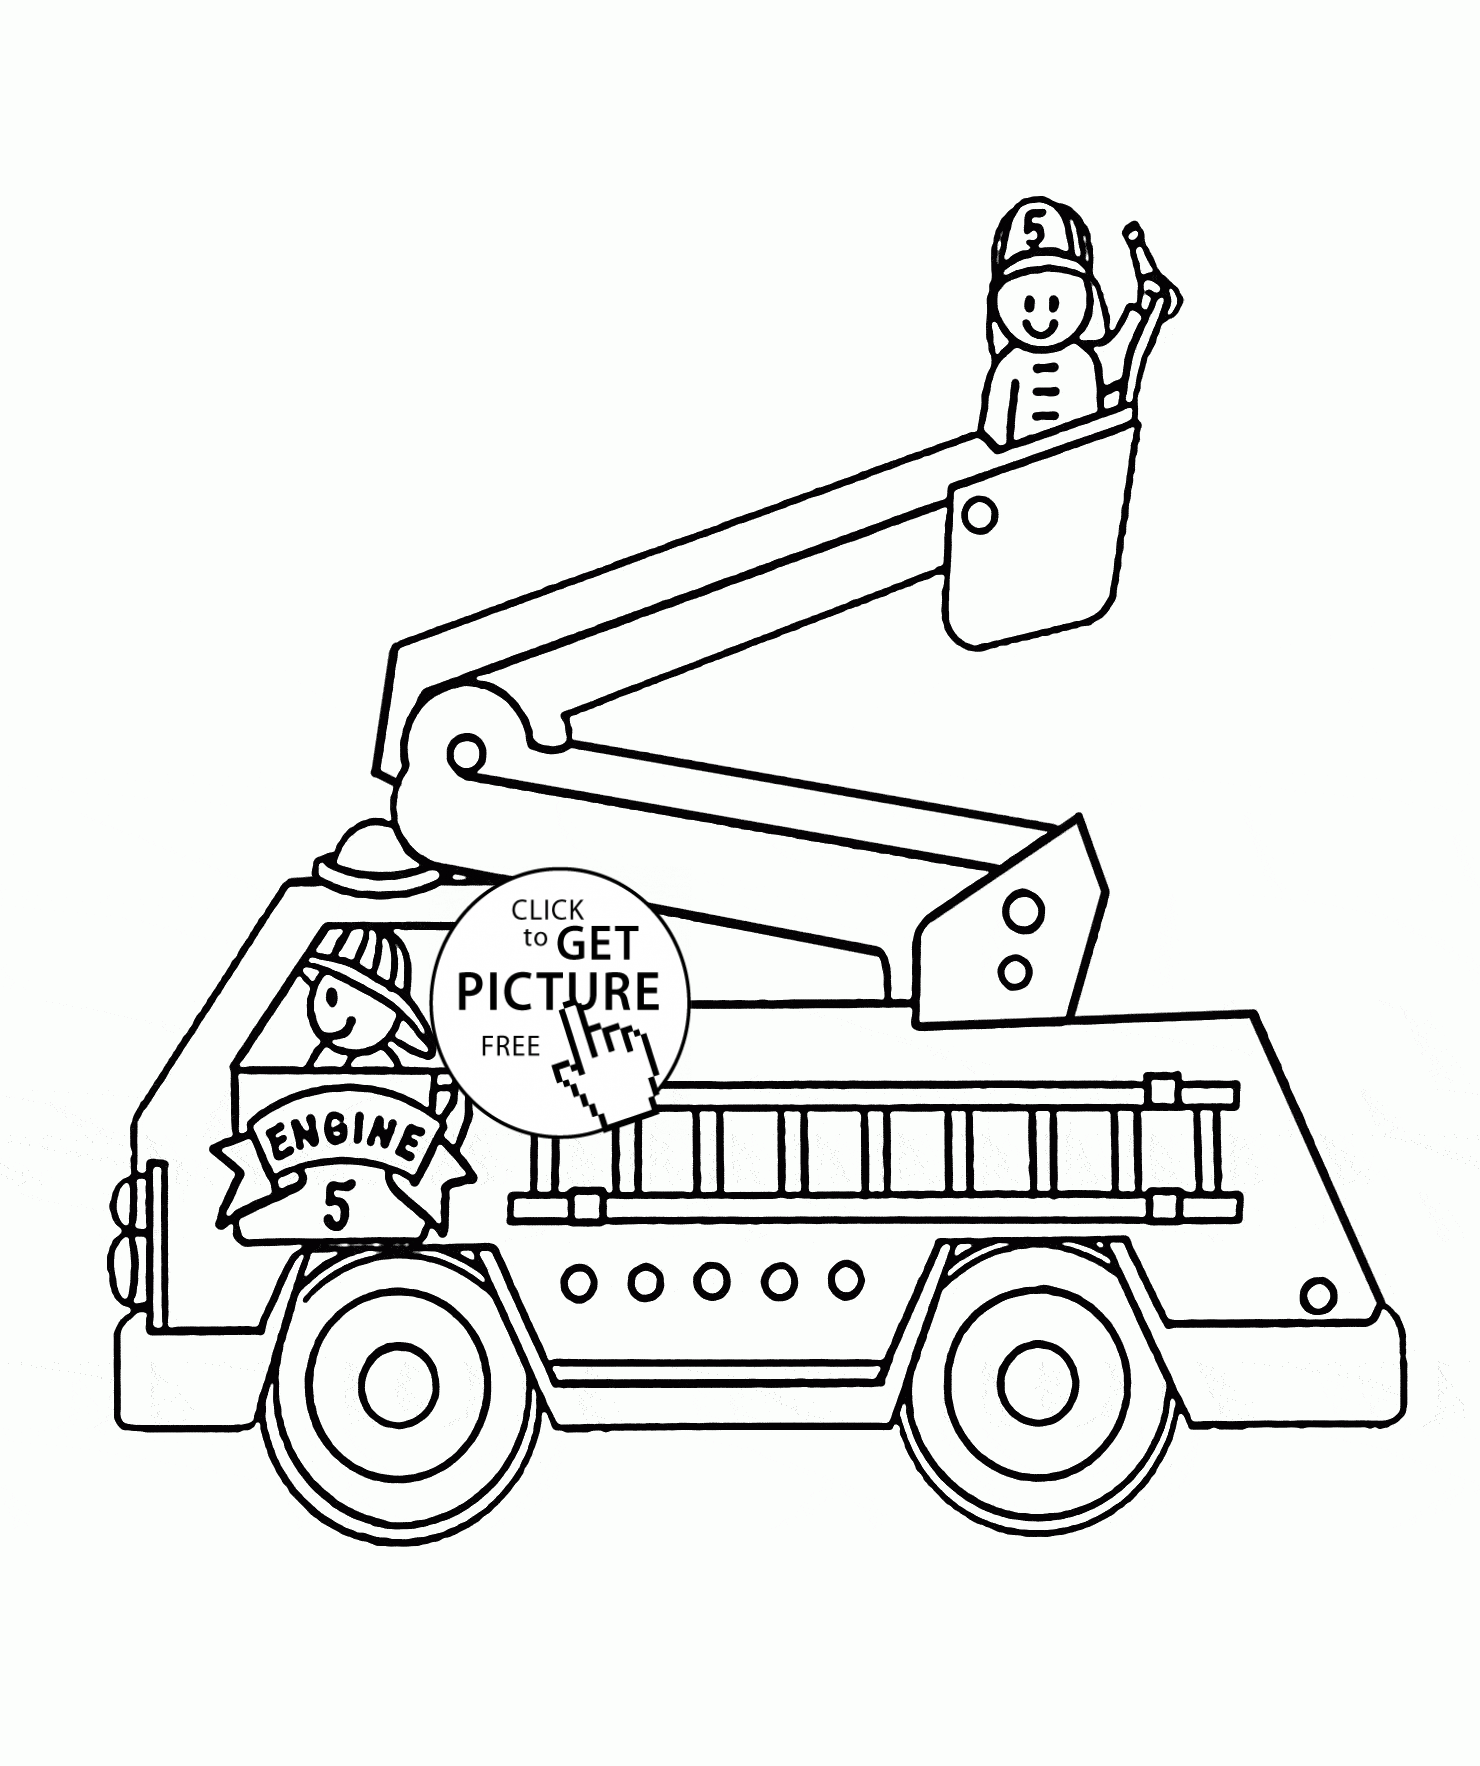 Fire Engine Truck coloring page for kids, transportation coloring ...